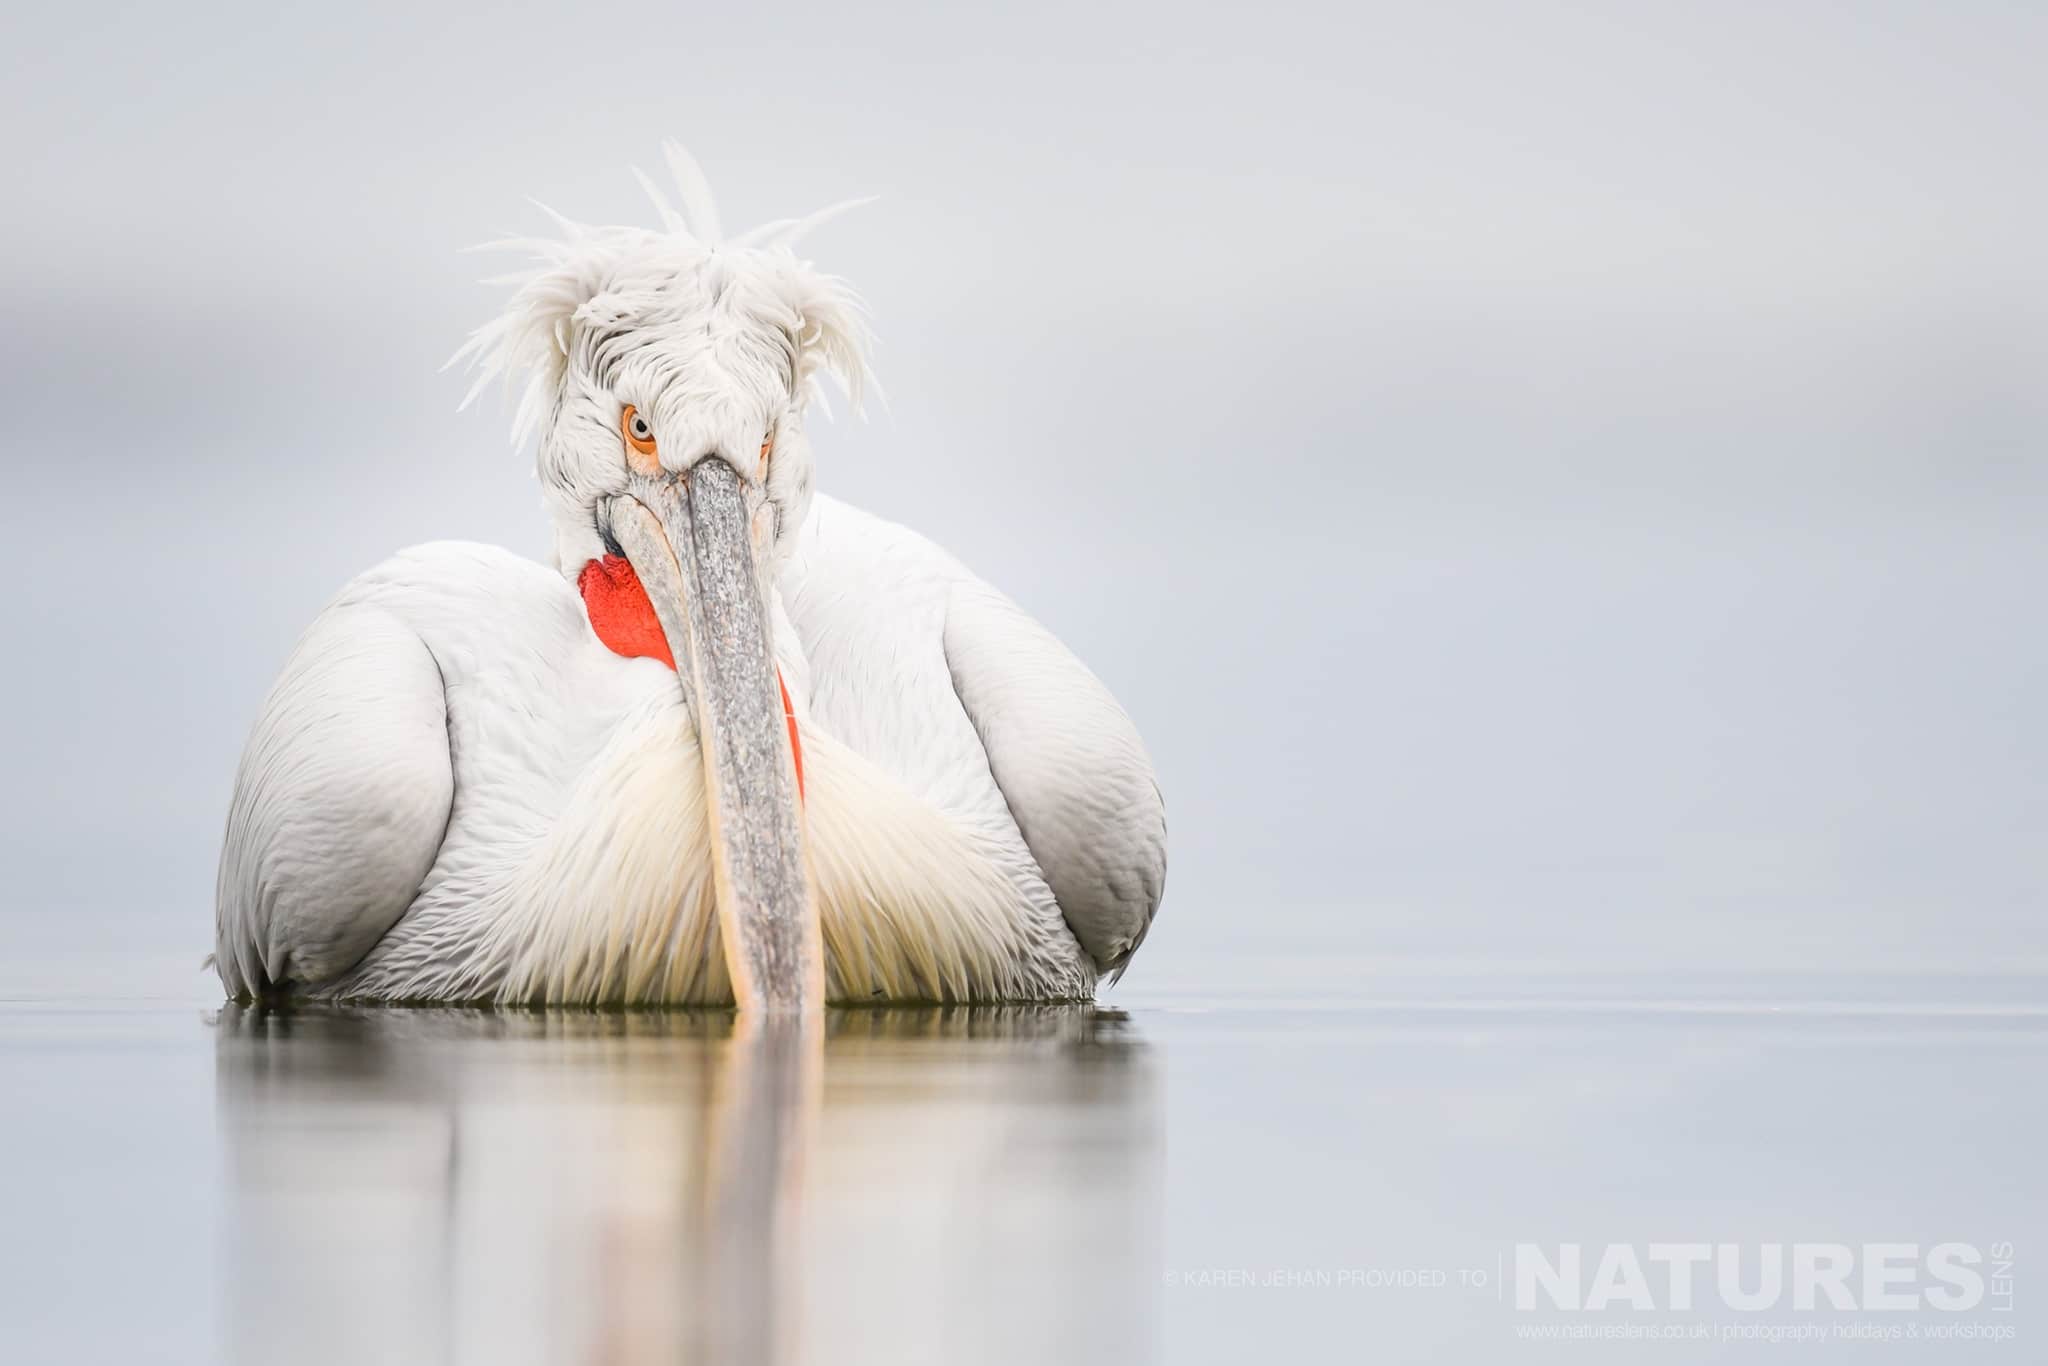 A Dalmatian Pelican drifts gently on the waters of Lake Kerkini photographed during a NaturesLens Dalmatian Pelican Photography Holiday